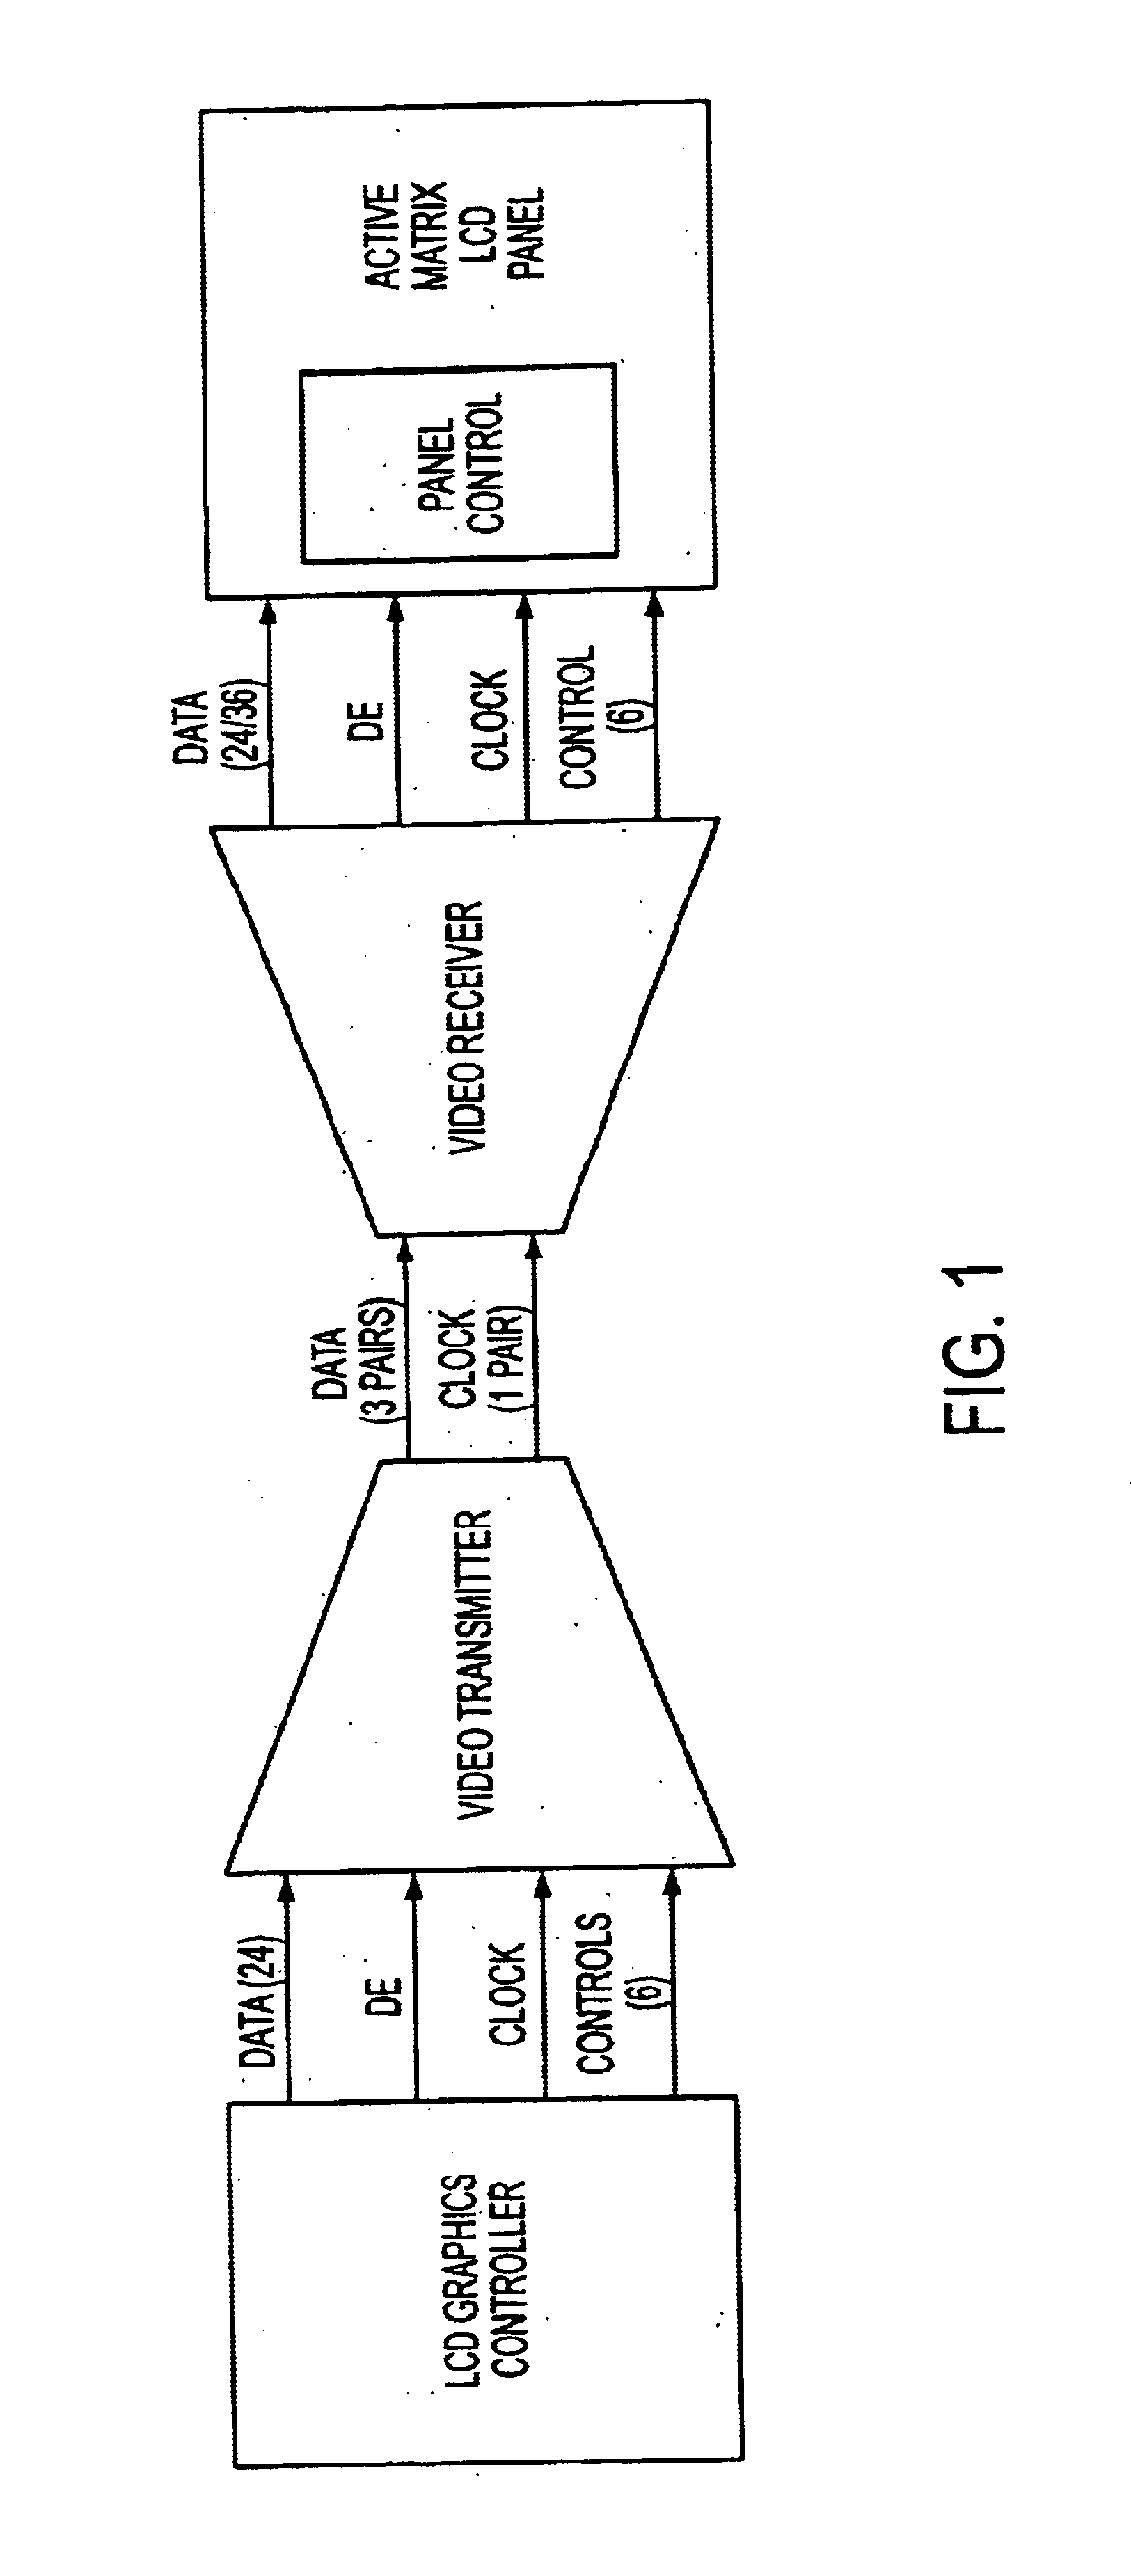 Methods and systems for TMDS encryption